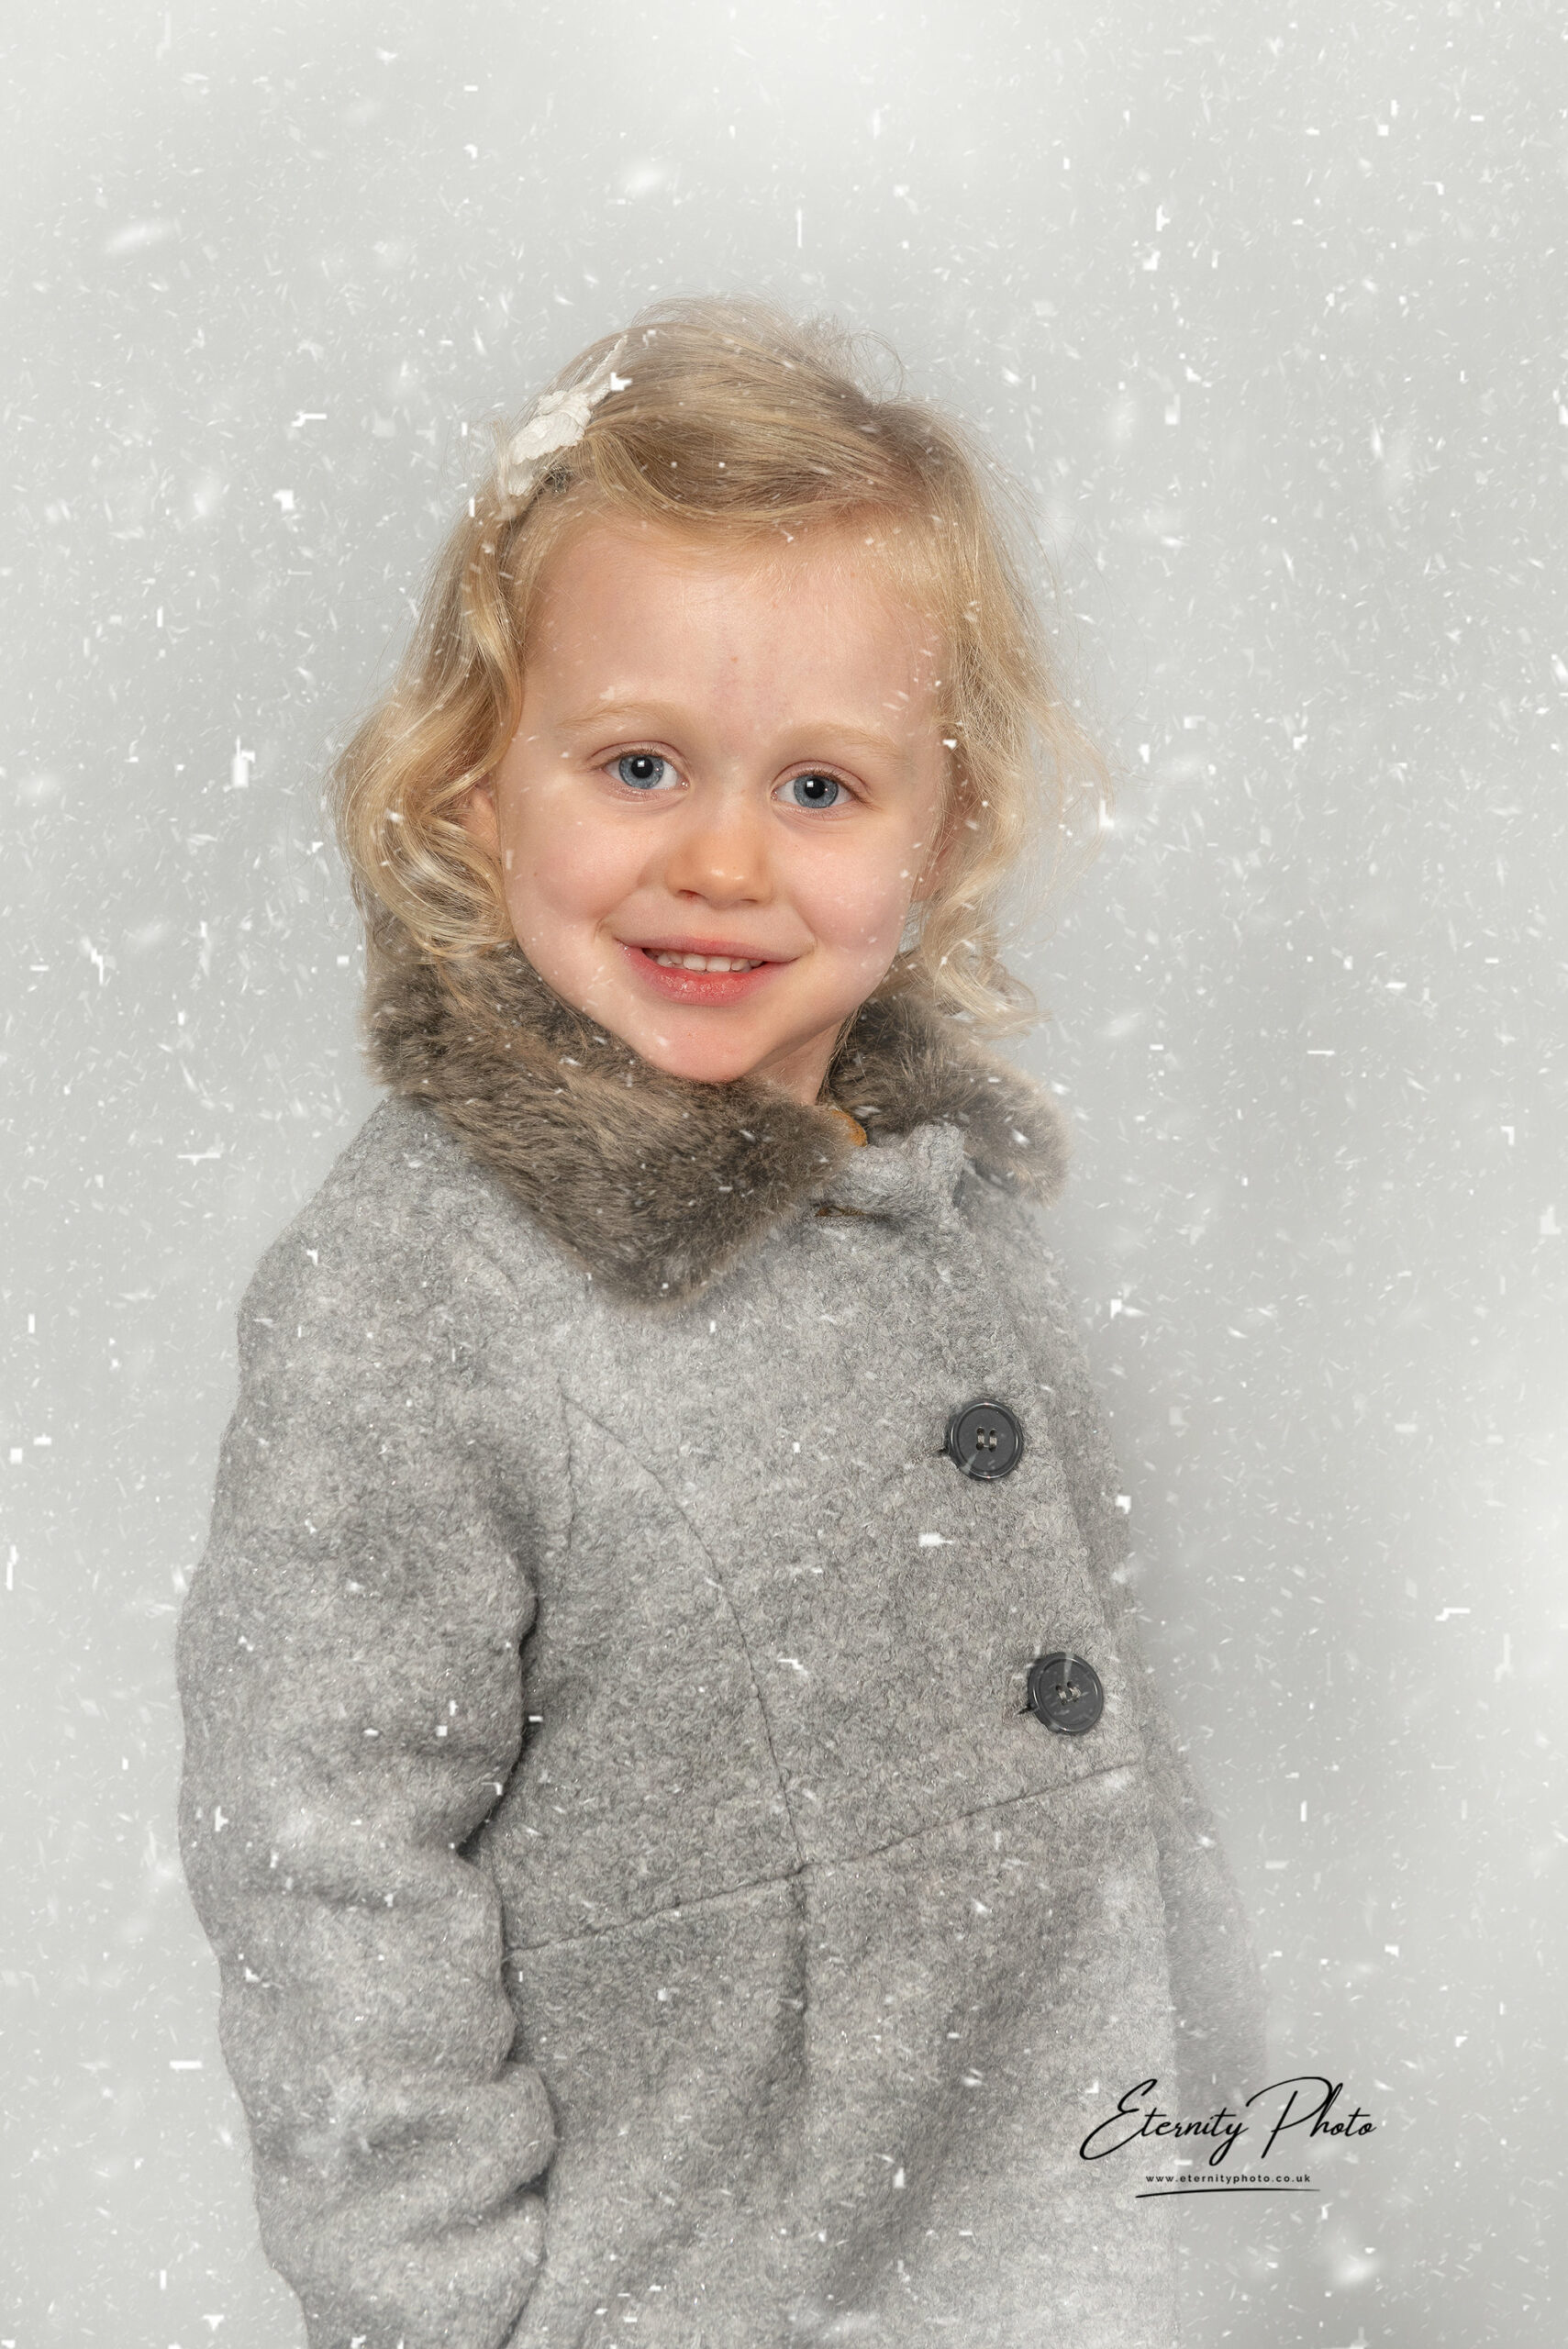 Child in grey coat, snowfall background.